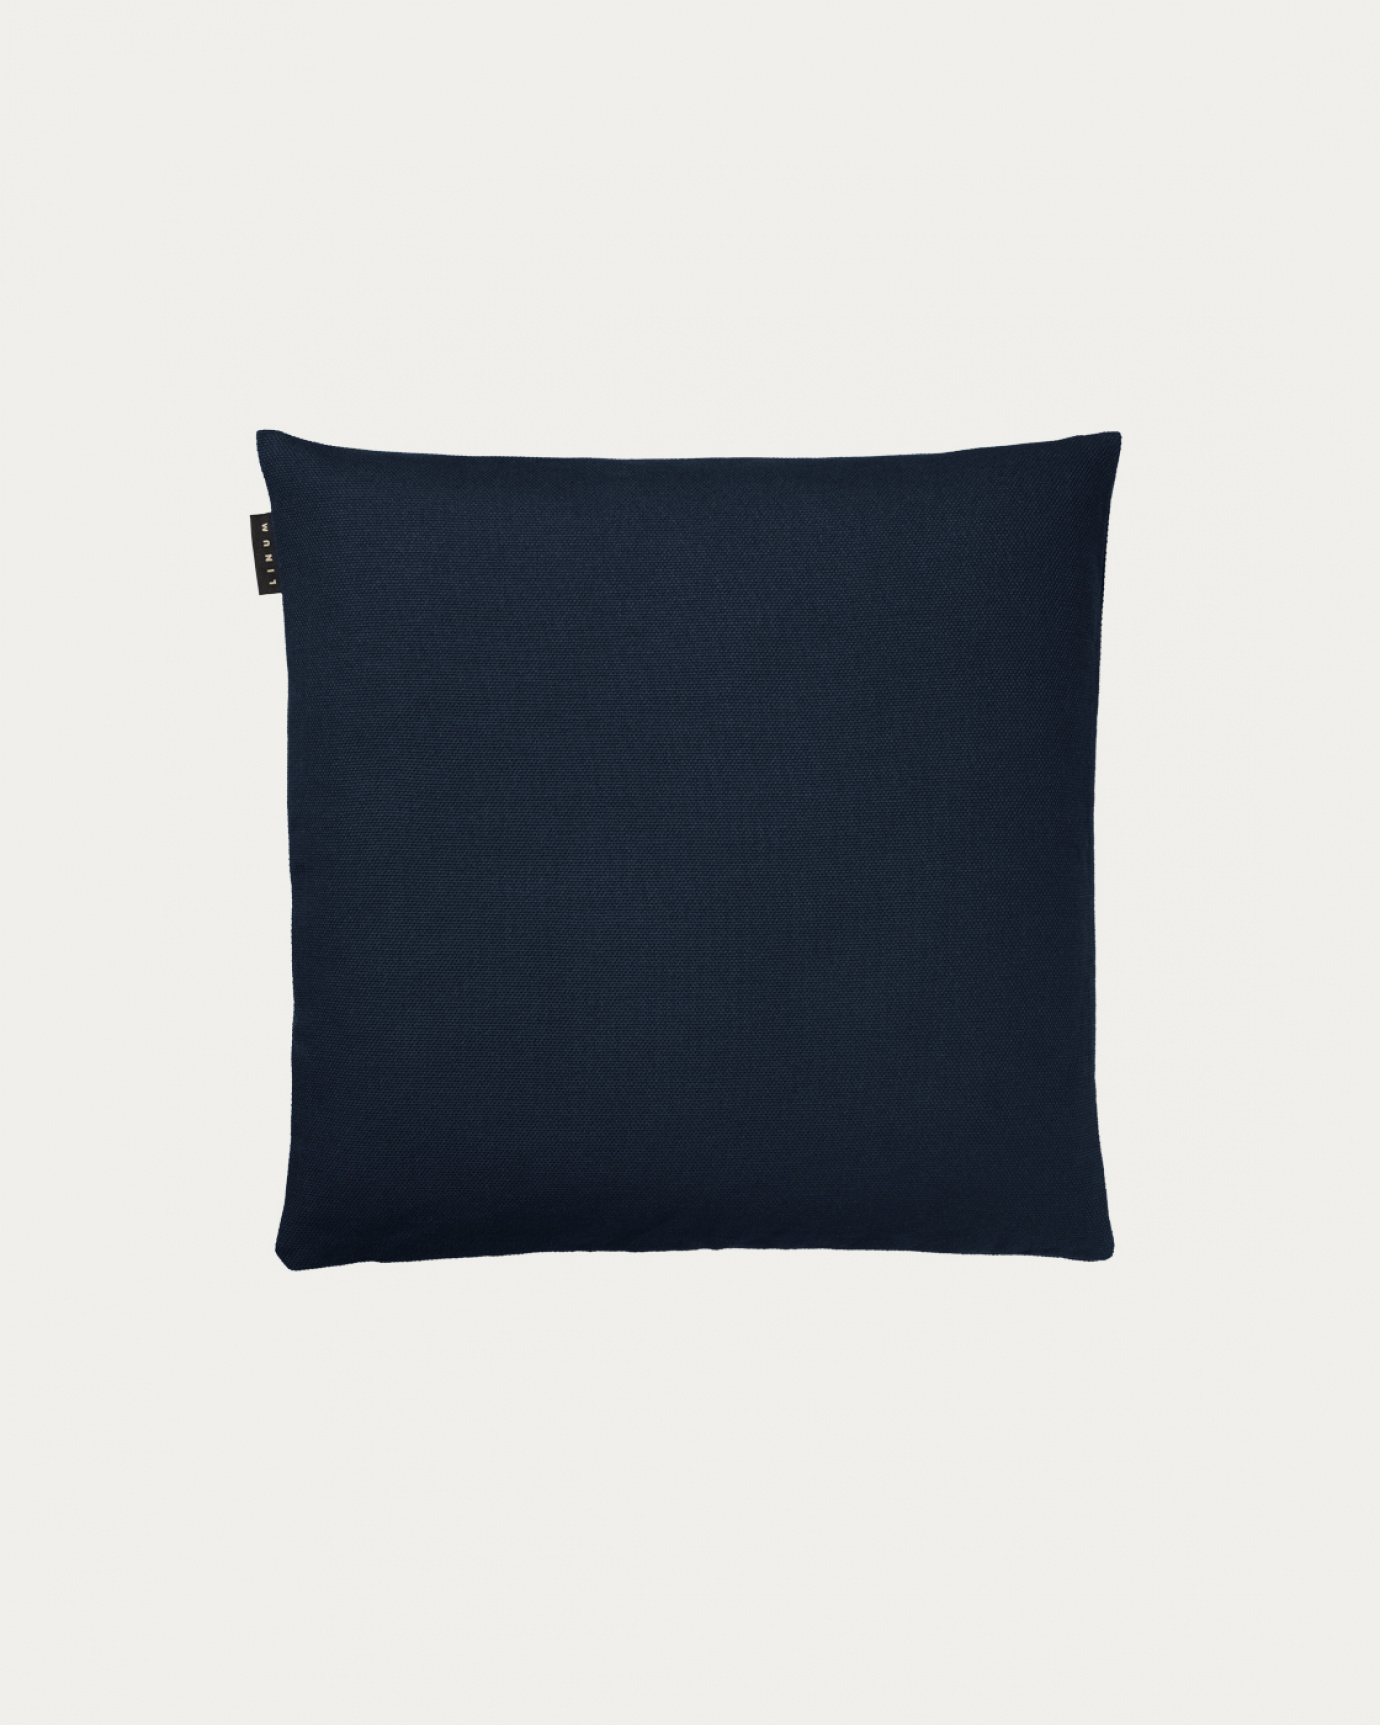 PEPPER Cushion cover 40x40 cm Dark navy blue in the group ASSORTMENT / STANDARD / Cushion covers at LINUM DESIGN (23PEP04000C16)